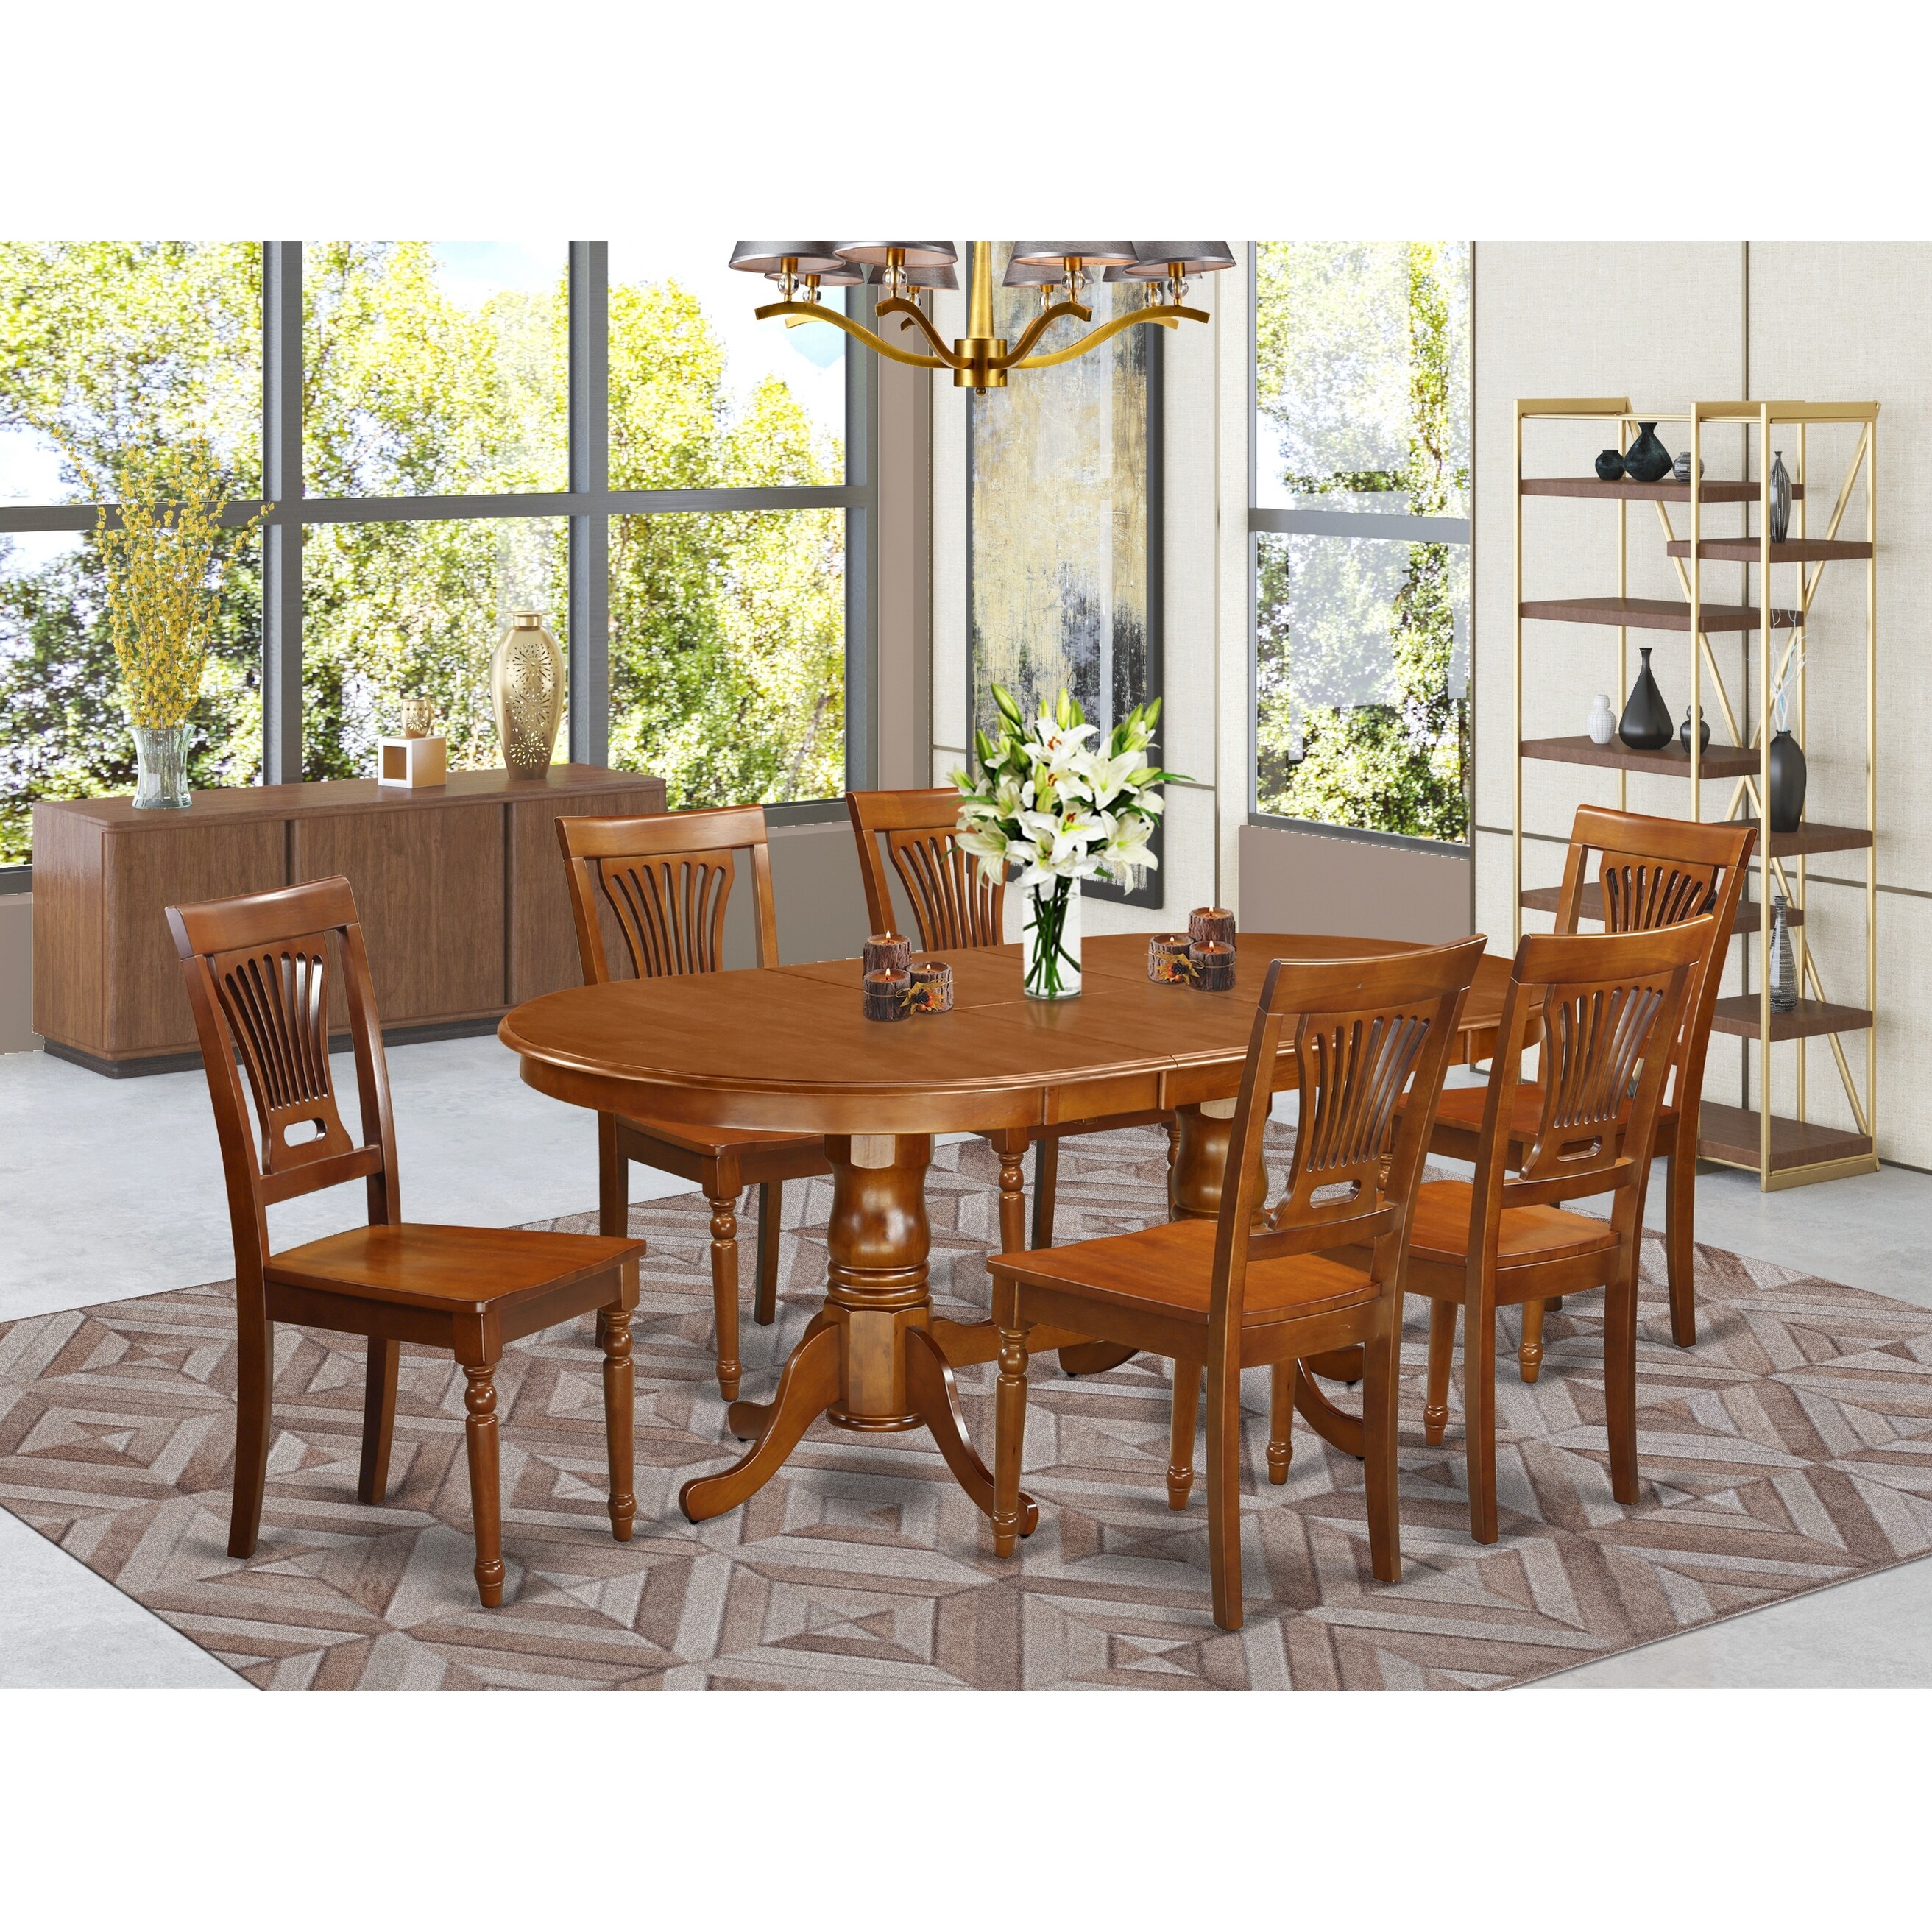 PLAI7 SBR 7 PC Dining Set For 6 Dining Table With 6 Dining Chairs Overstock 17676506